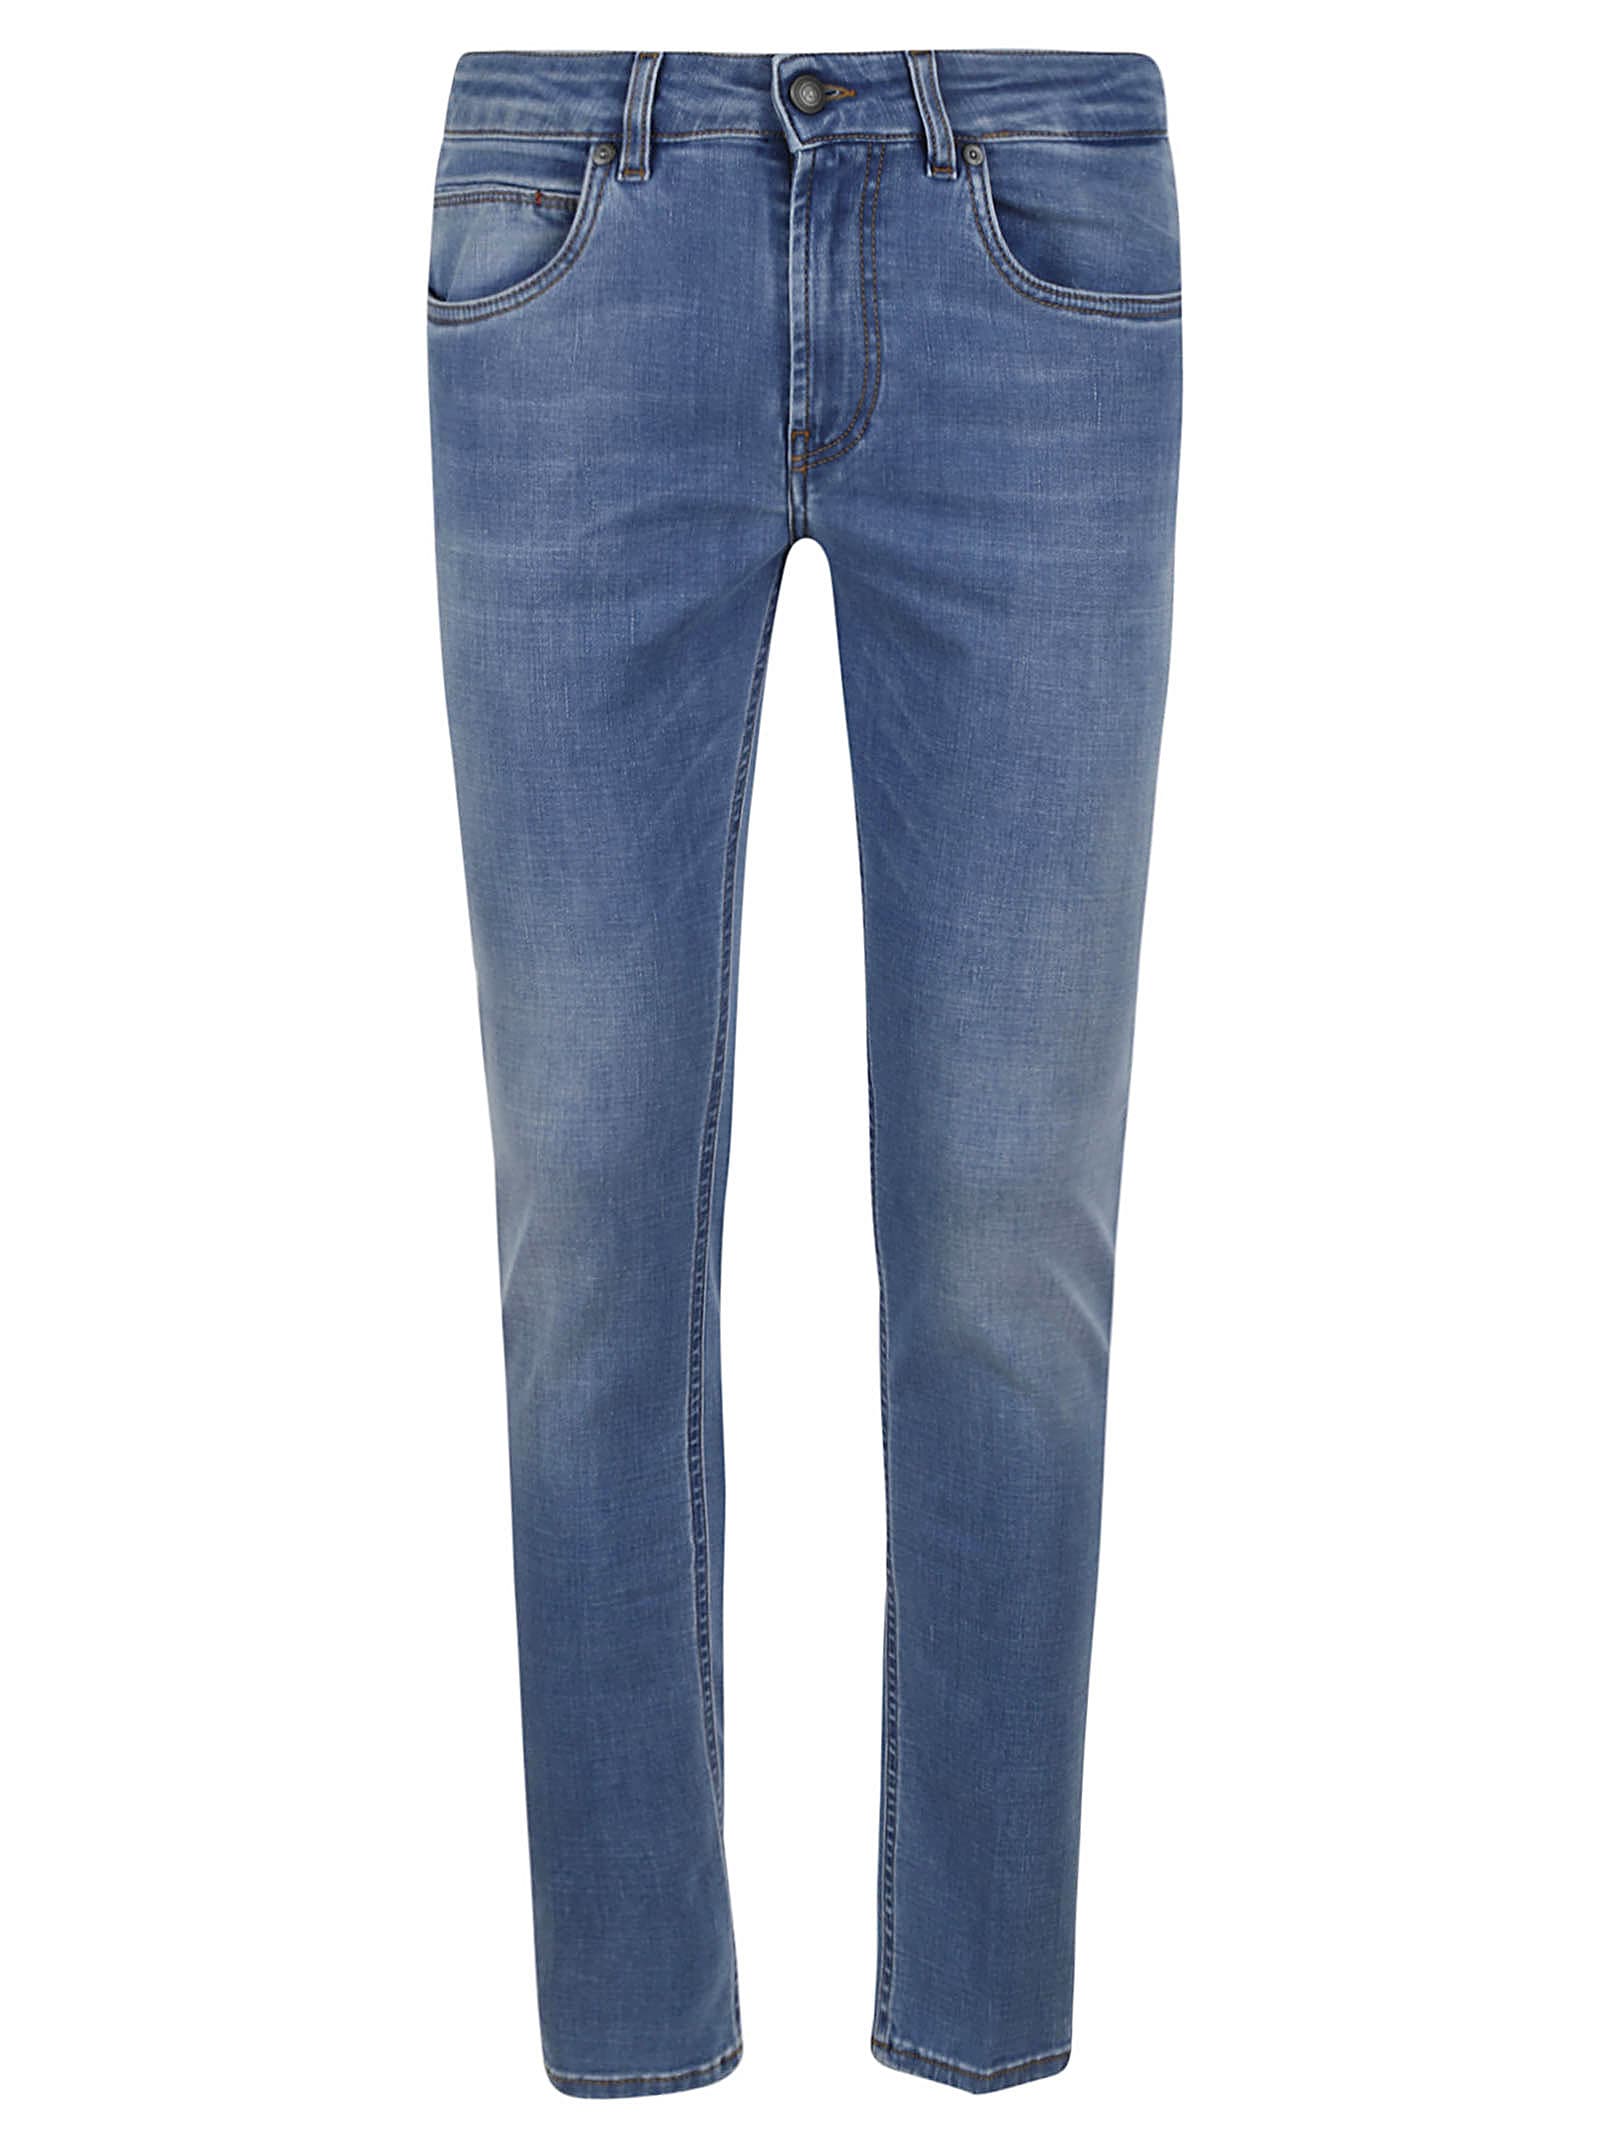 FAY SKINNY FITTED JEANS